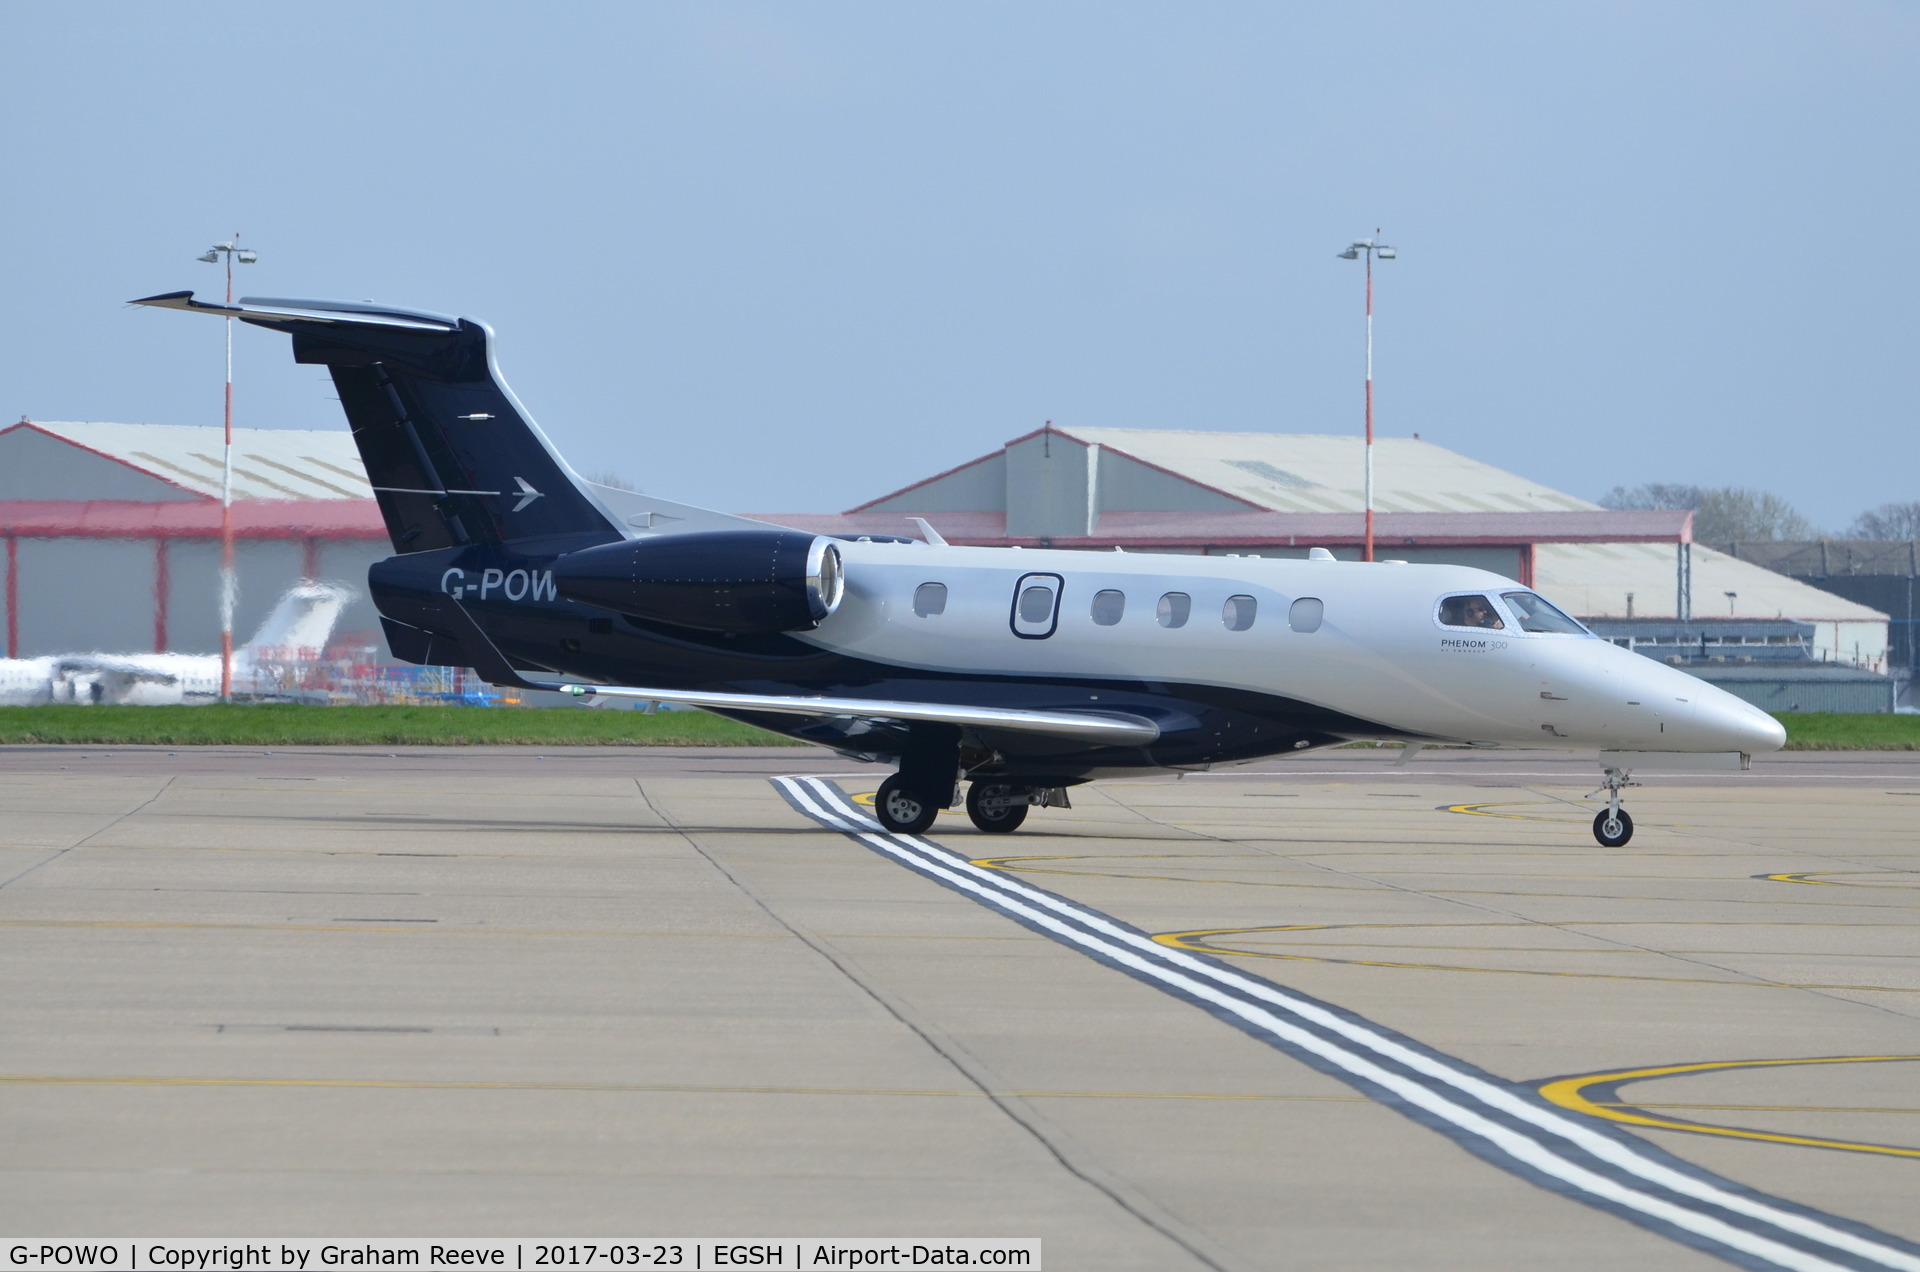 G-POWO, 2015 Embraer EMB-505 Phenom 300 C/N 50500266, Just landed at Norwich.